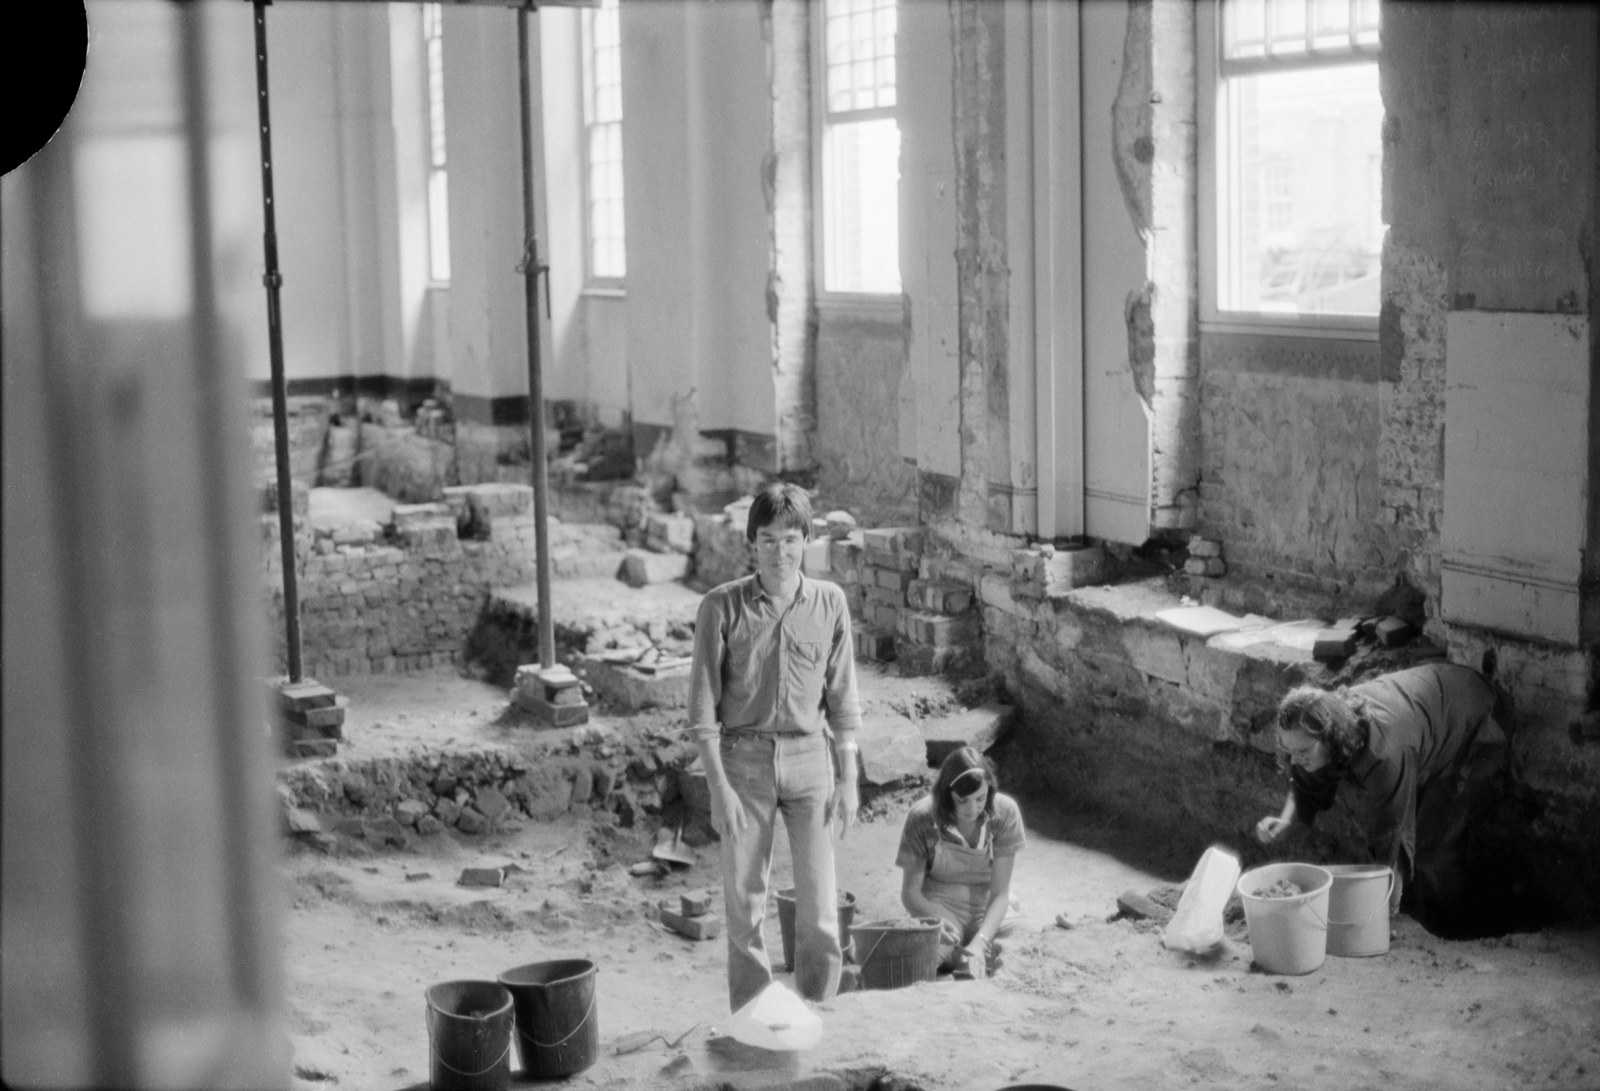 Archaeologist Robert Varman and two volunteers excavating the north-east room of the ground floor of Hyde Park Barracks, 1981.